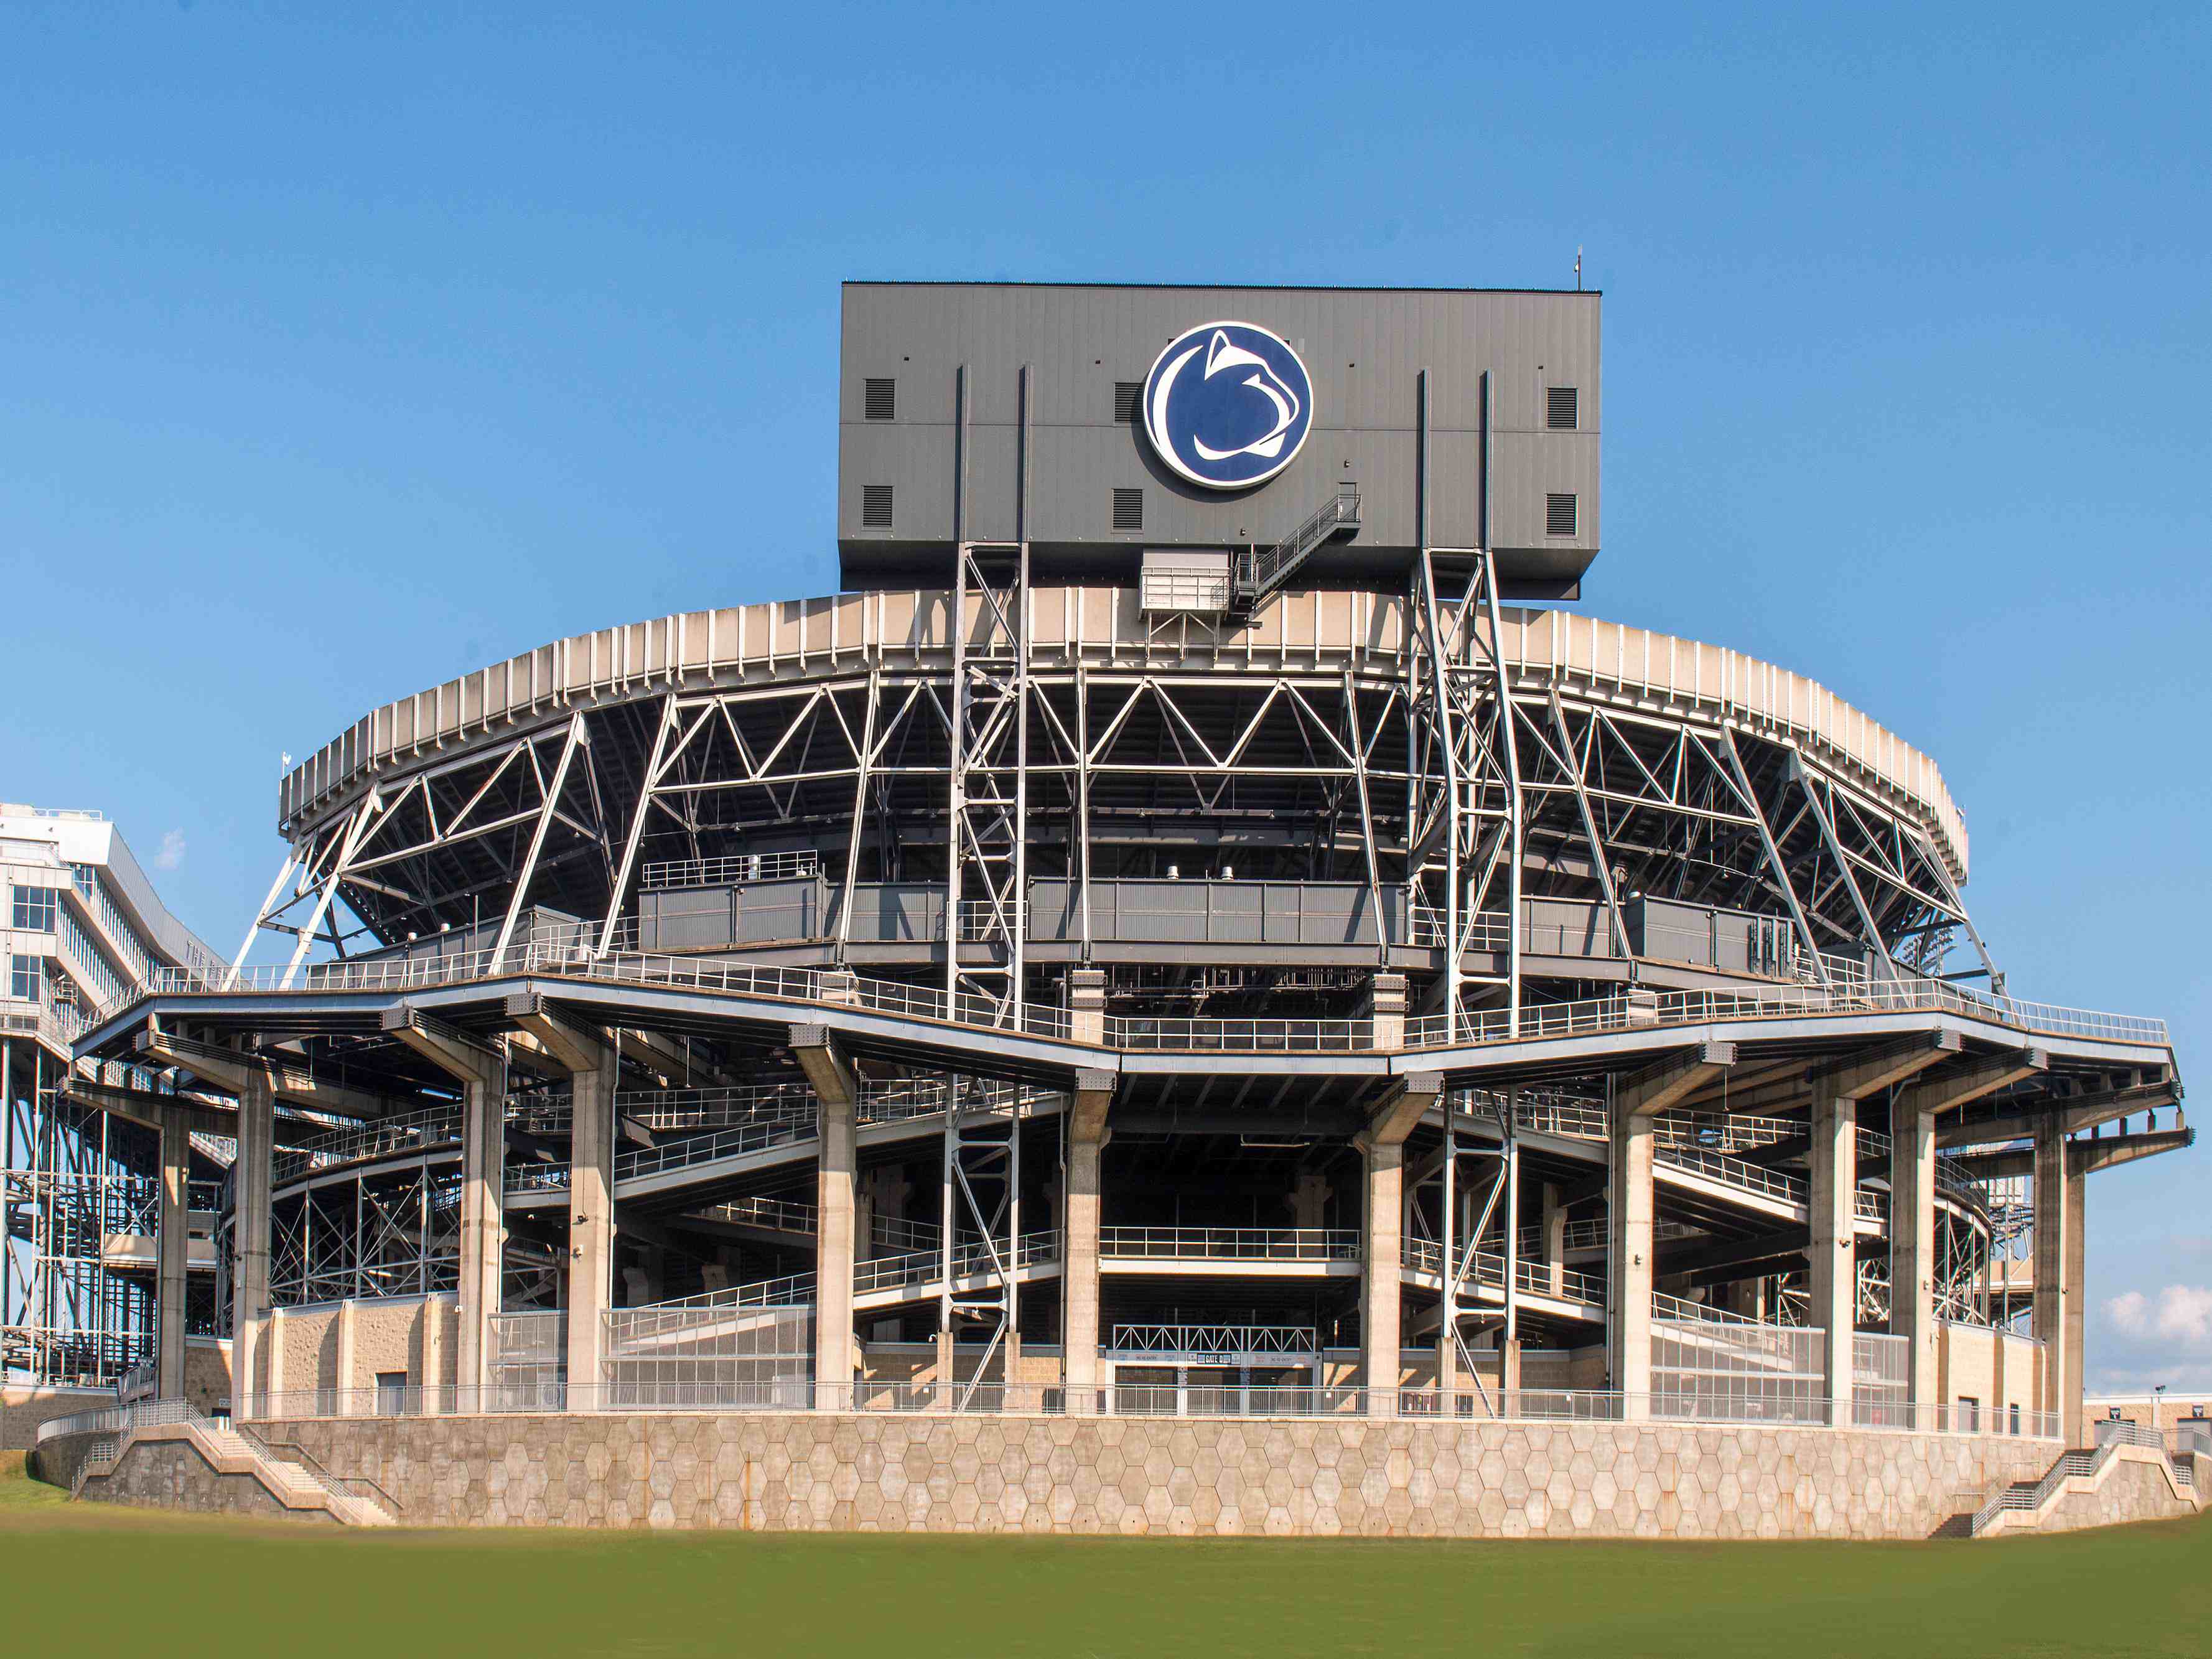 We are only a few miles from Penn State University' Beaver Stadium